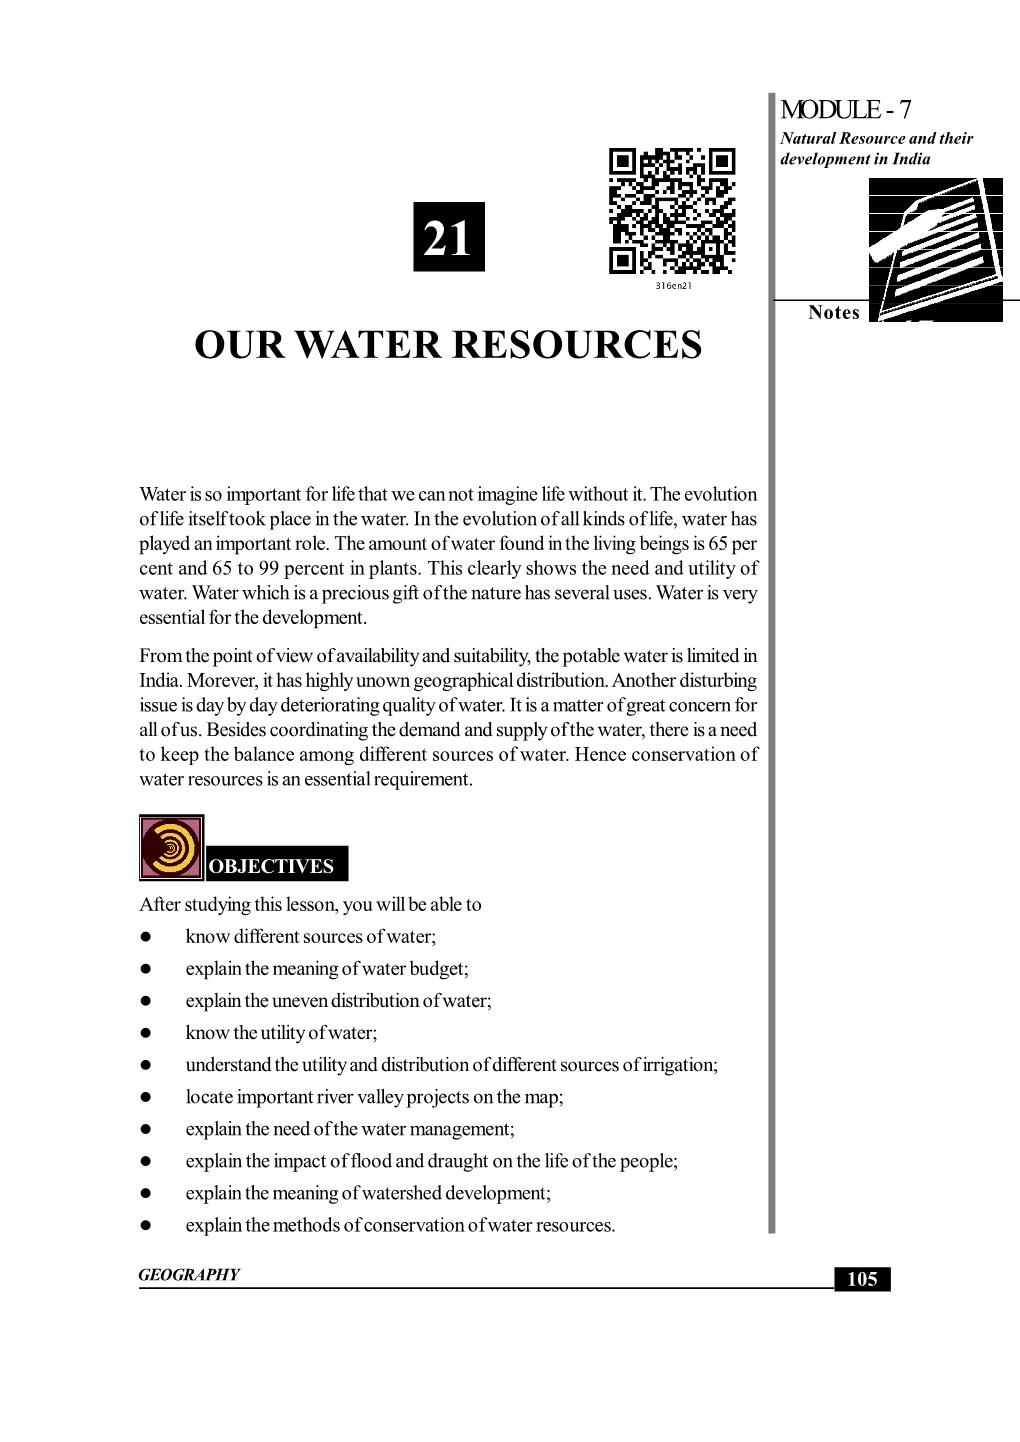 Our Water Resources MODULE - 7 Natural Resource and Their Development in India 21